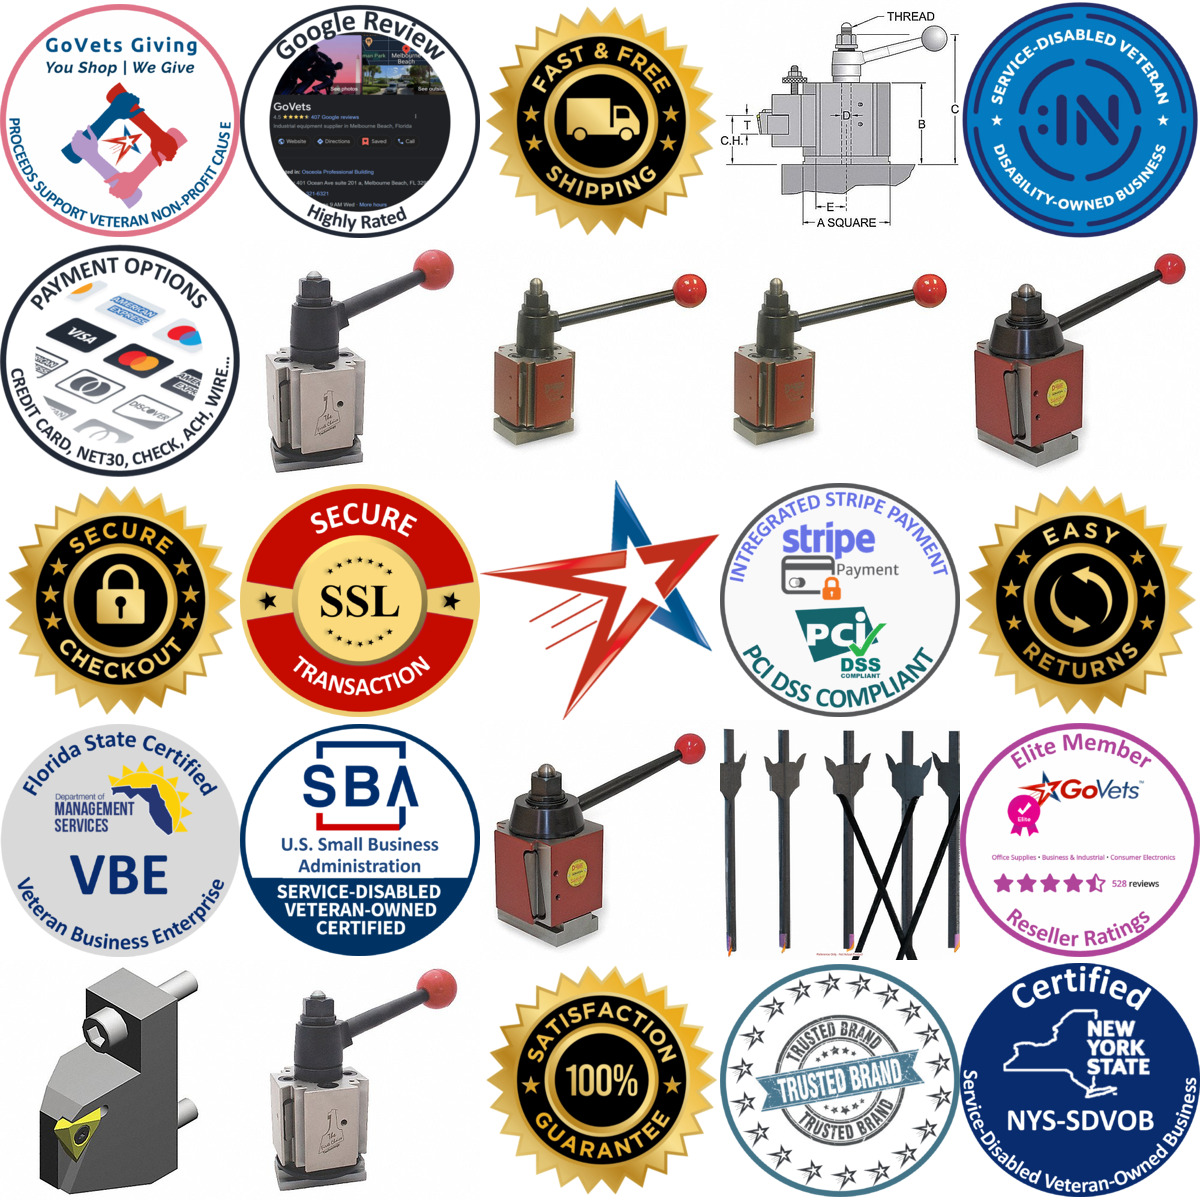 A selection of Tool Posts products on GoVets